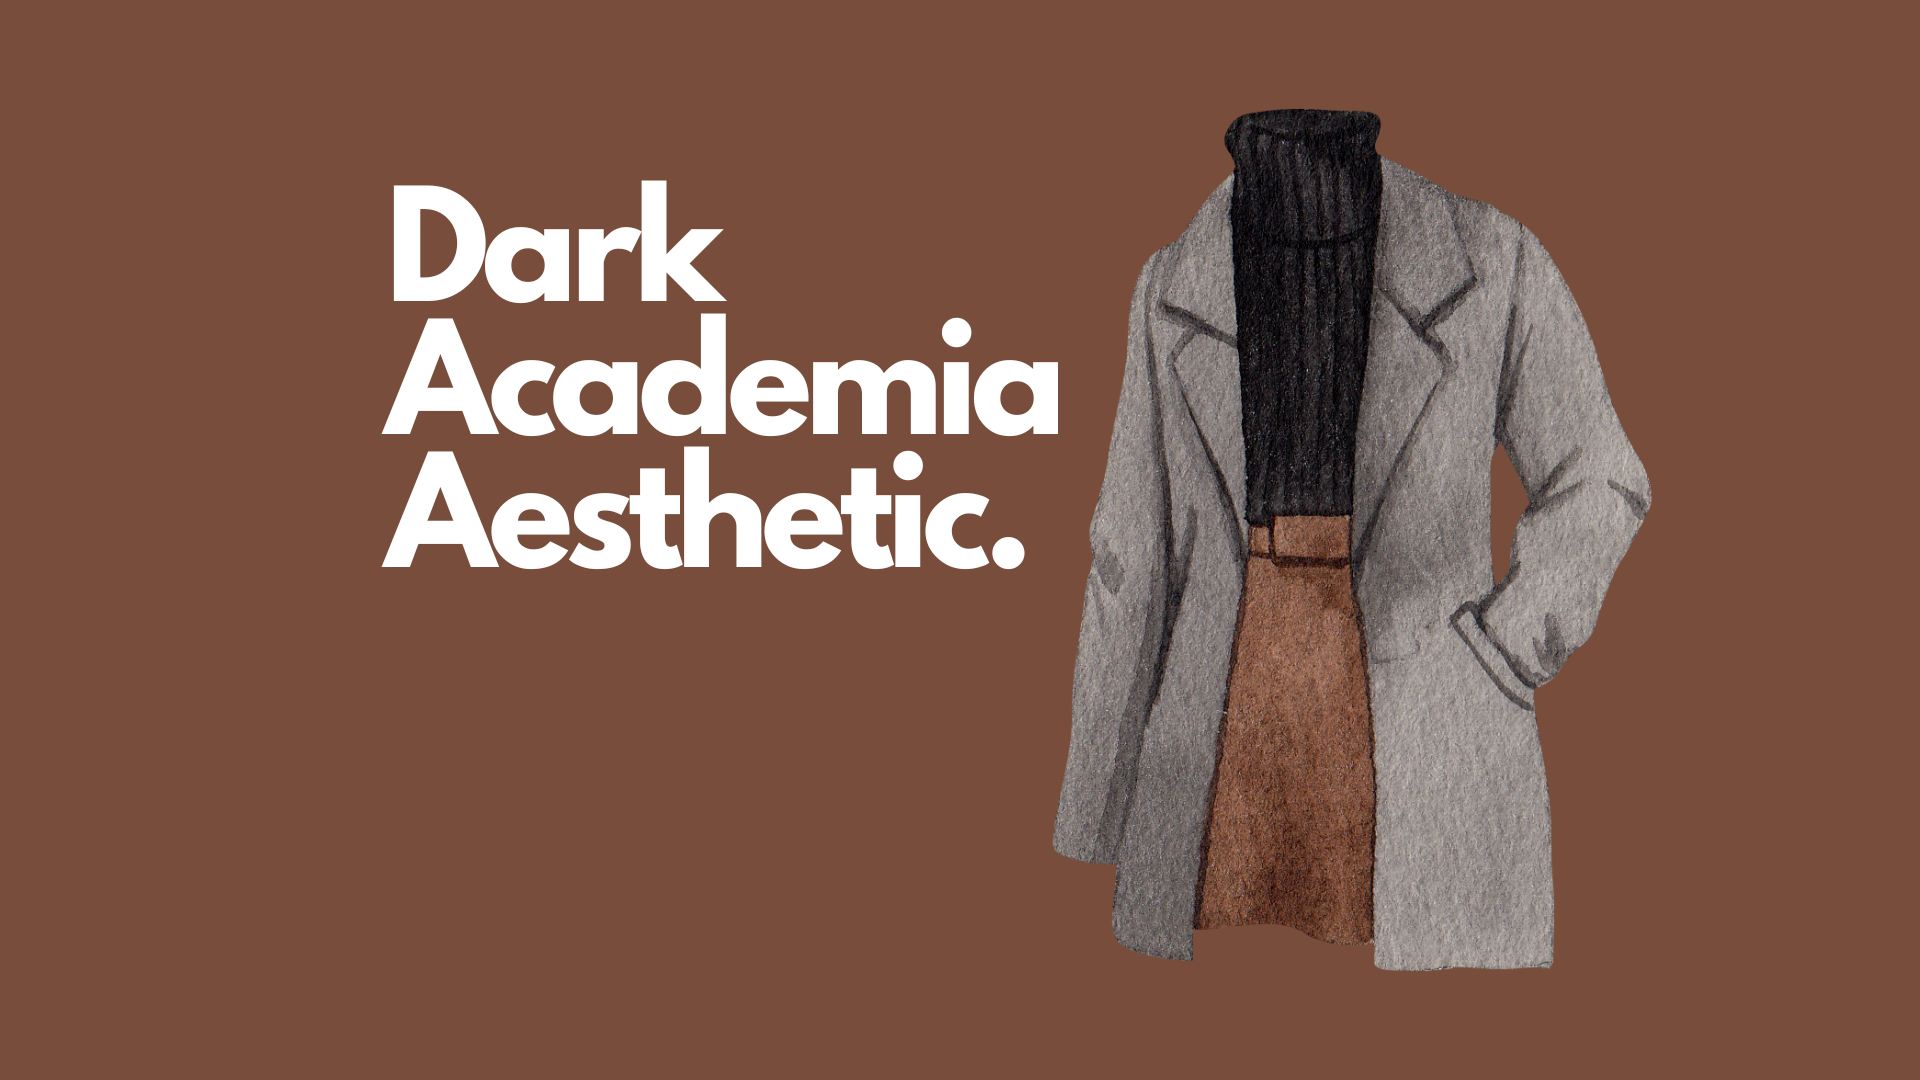 The Dark Academia Aesthetic – Outfits, Clothing and Brands